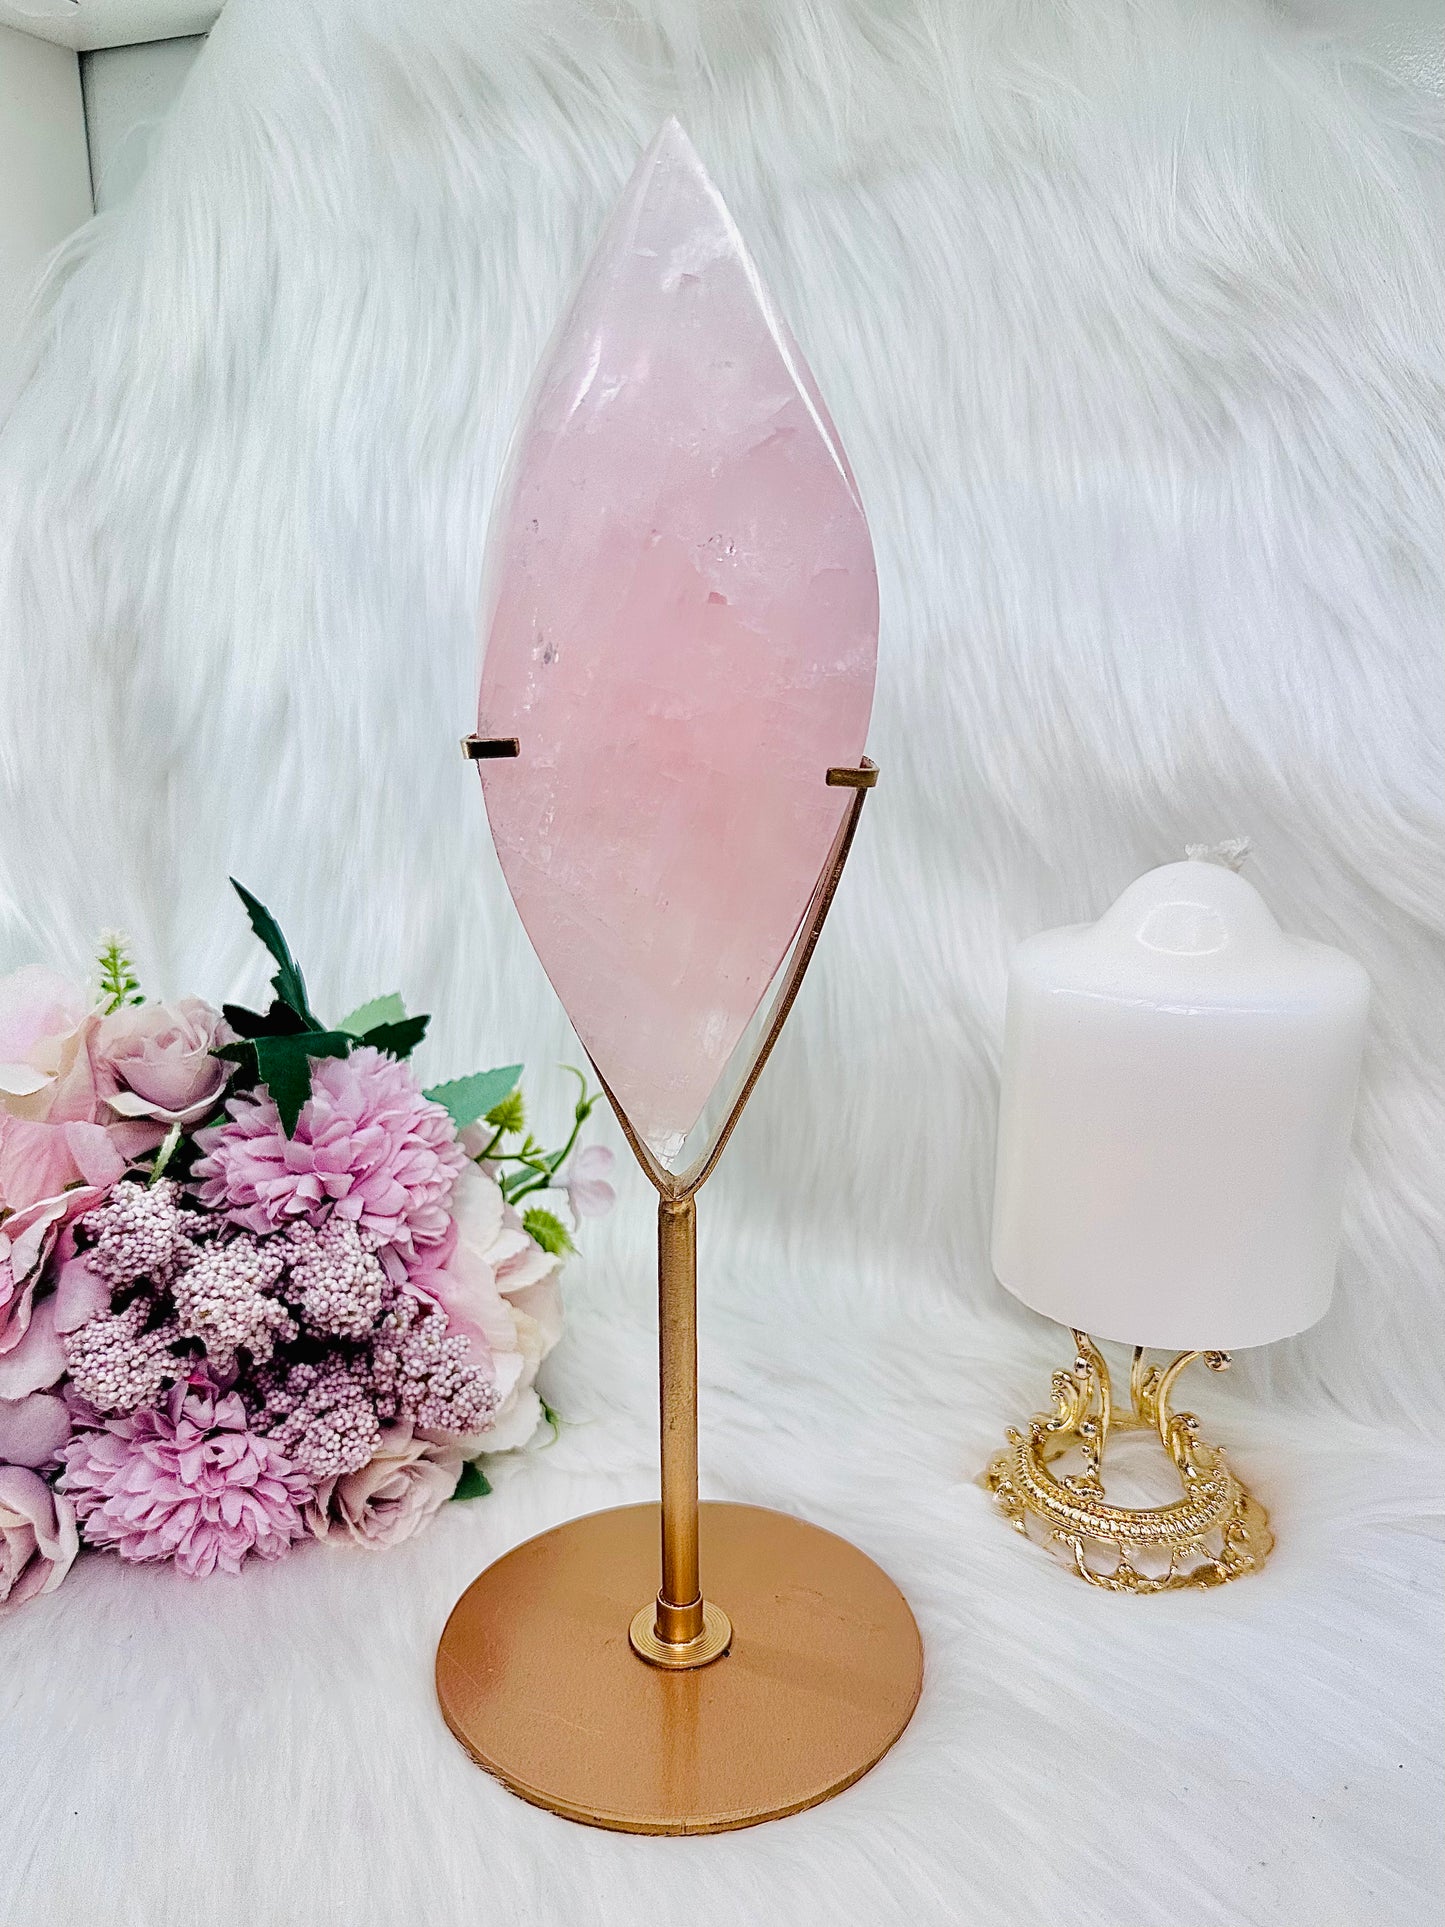 Classy & Absolutely Fabulous Large 28cm Rose Quartz Perfectly Carved Flame with Rainbows On Gold Stand 964grams ~ A Truly Stunning Piece